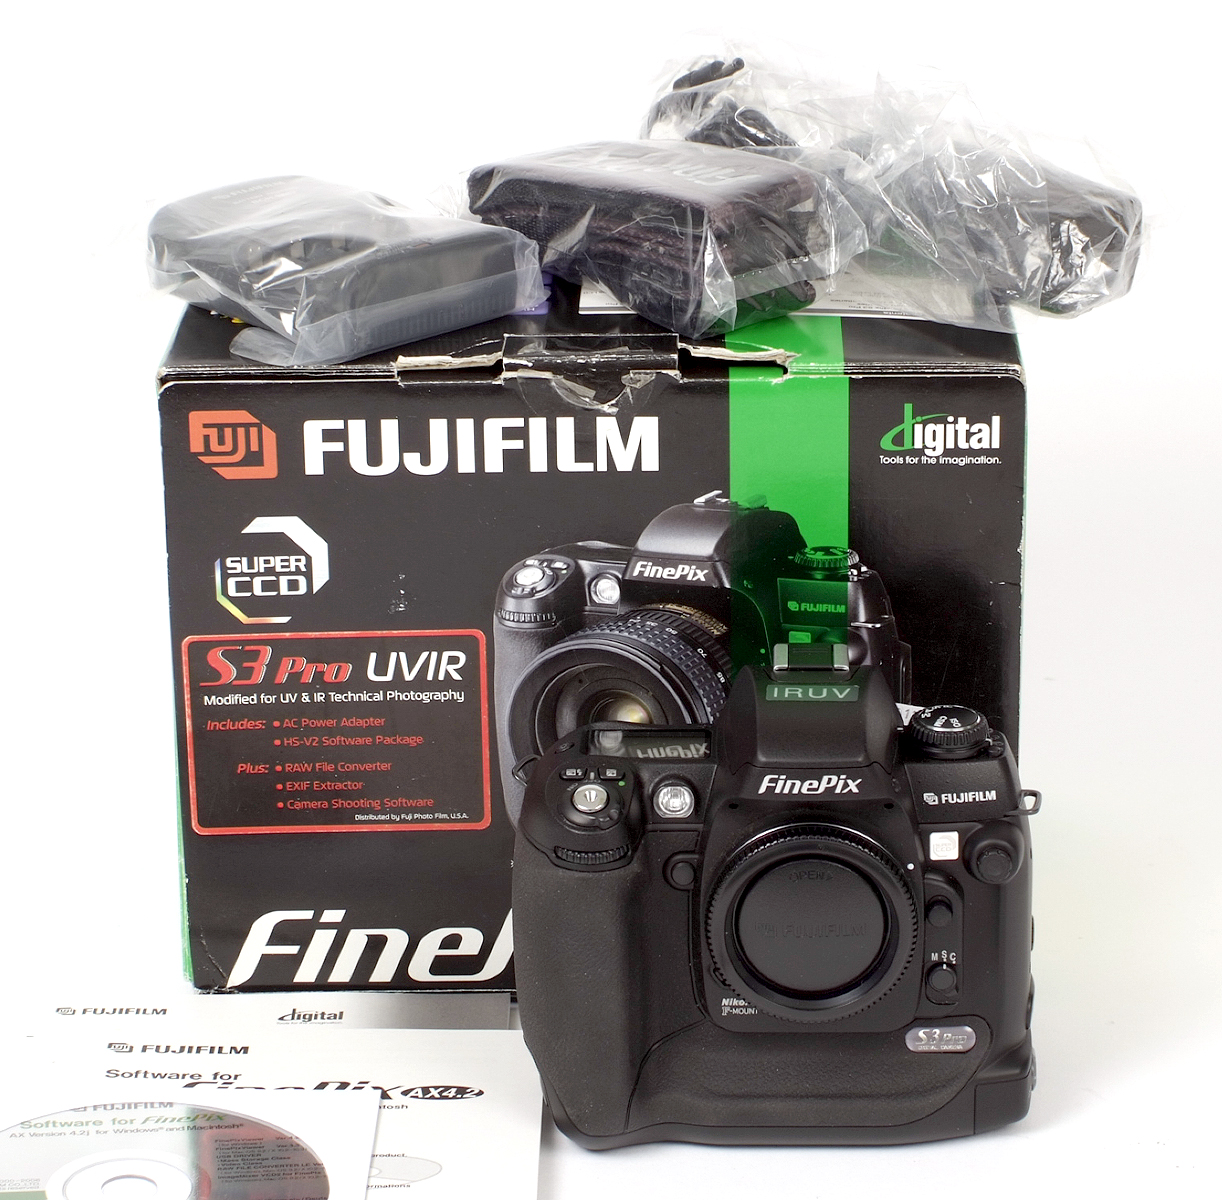 RARE Fuji S3 Pro UVIR DSLR. (condition 5E). With battery, charger, strap, CD & cables, in makers